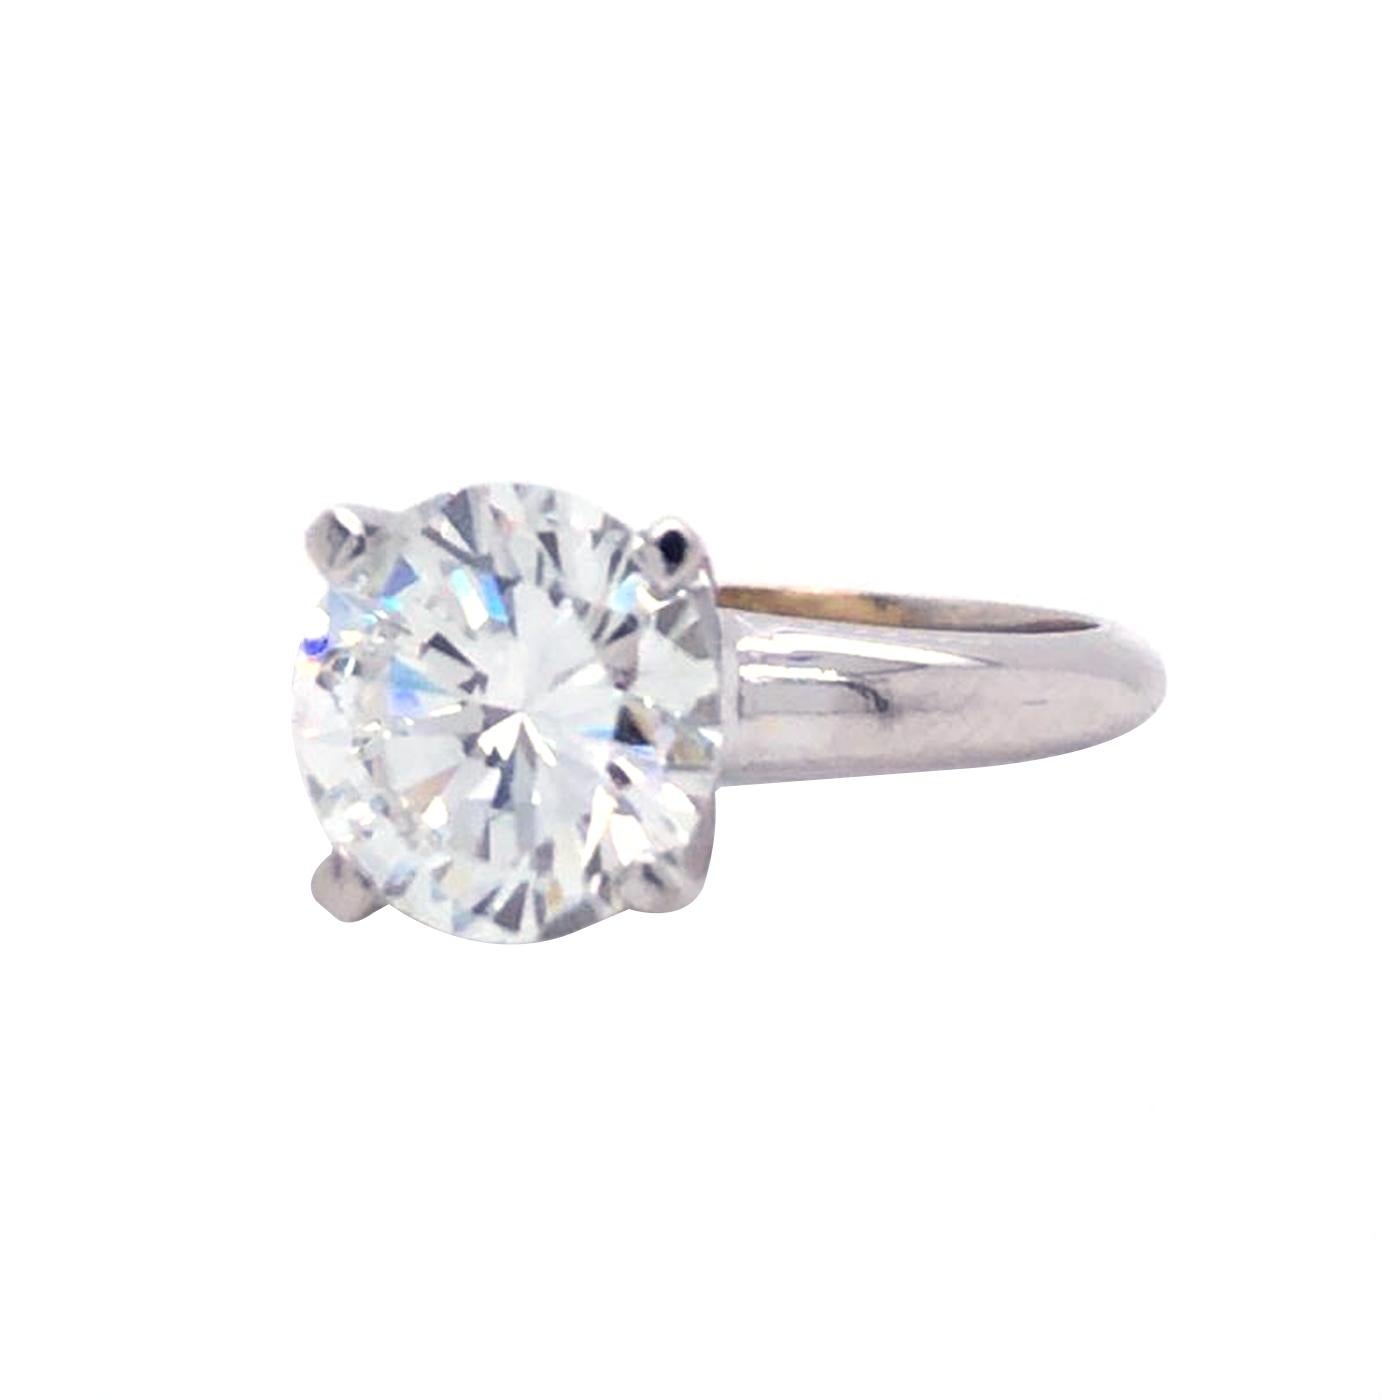 Center Round Brilliant  F - Color, Si2  Clarity, 100% eye Clean, 8.60mm -8.62mm Solitaire 14 Karat White Gold ring, One of the beautiful diamonds, The ring weighs 5.3 grams, and is currently size 5.5, with easy adjustment up or down. Accompanied by